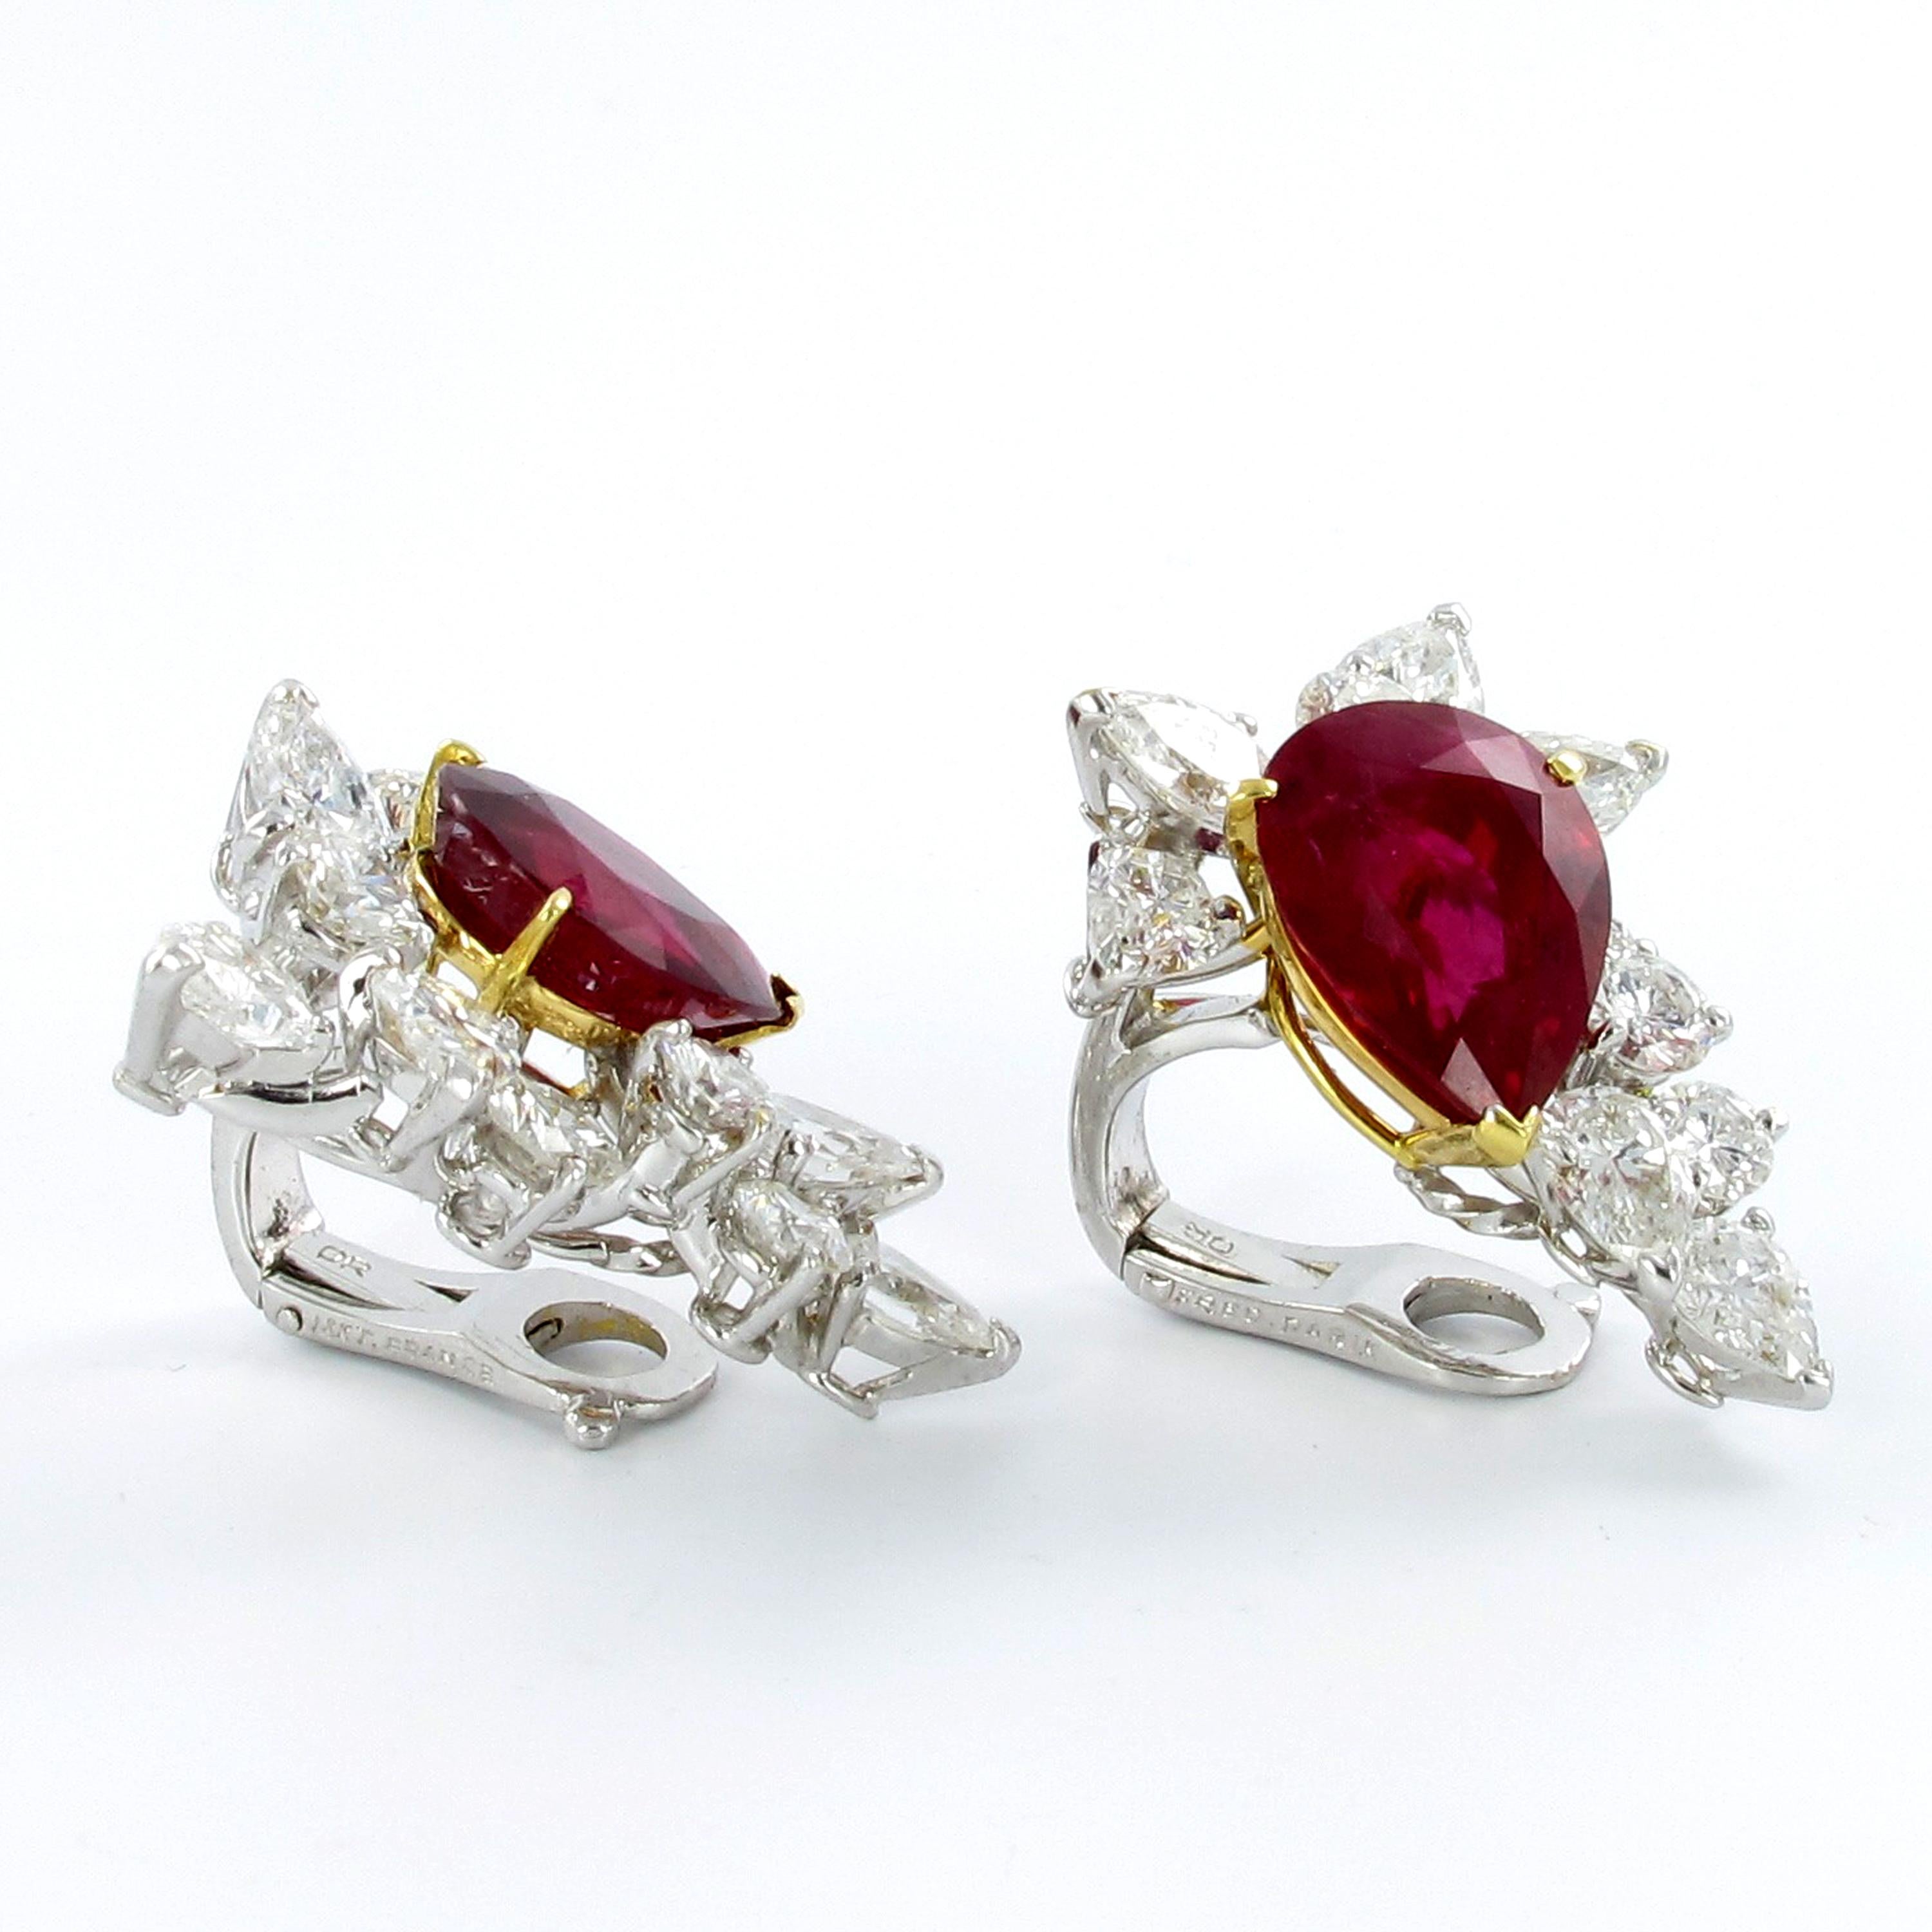 Spectacular Pair of Ruby and Diamond Ear Clips by FRED 2